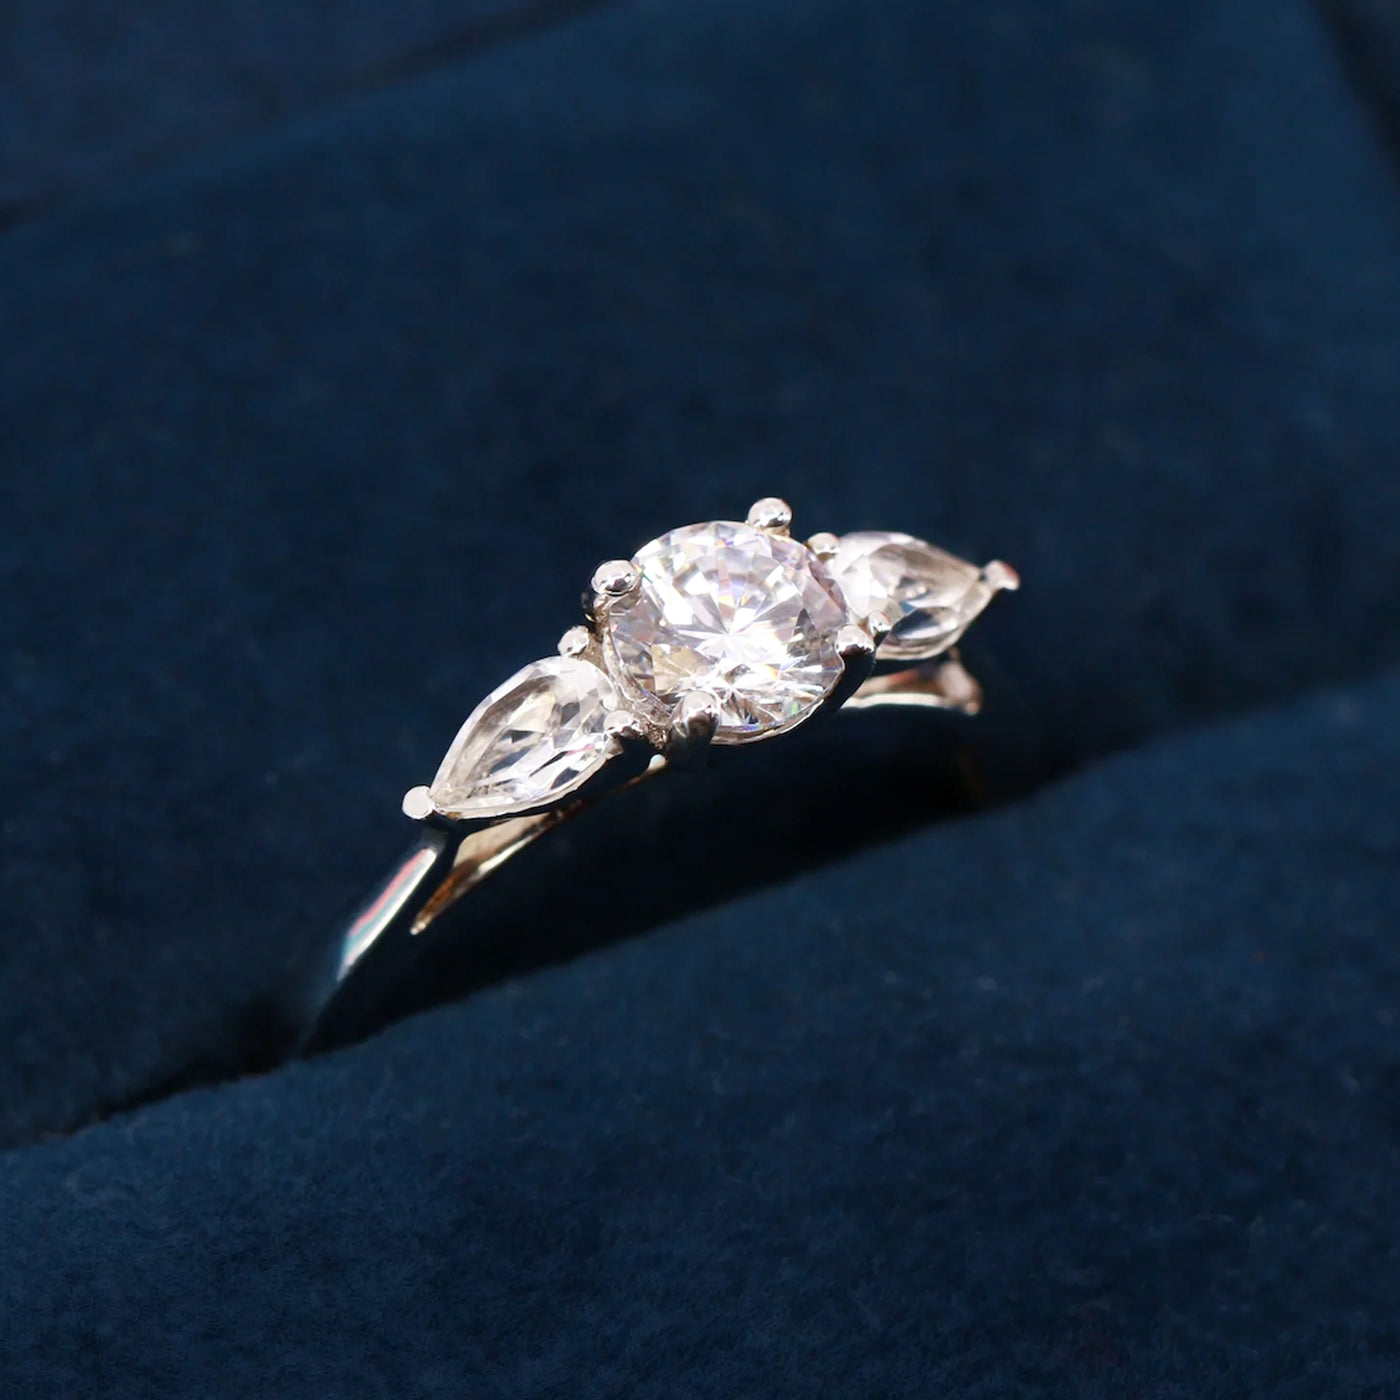 Daphne - White Diamond Trilogy Engagement Ring Pear Side Stones - Made-to-Order